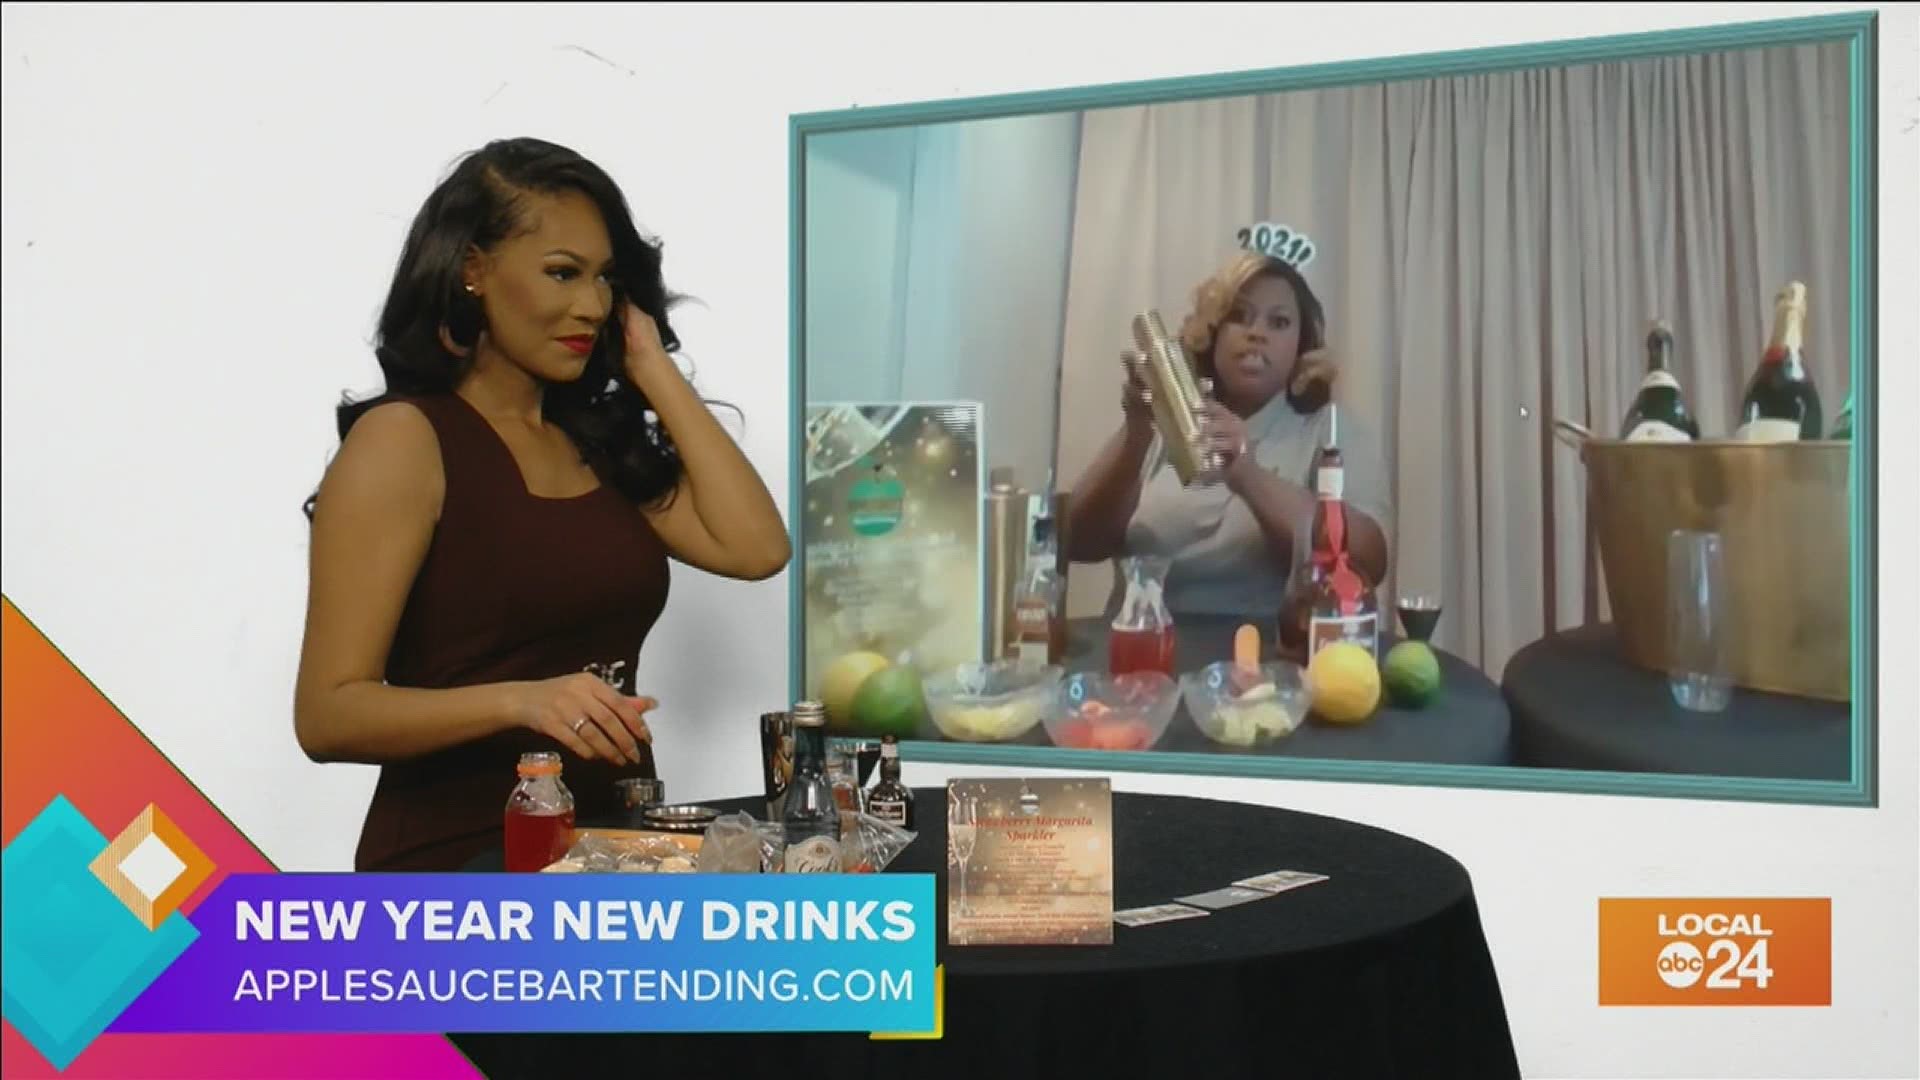 Celebrate 2021 with this DIY Cocktail recipe with Carmen D. Barfield, owner of Applesauce Bartending. Join the conversation!